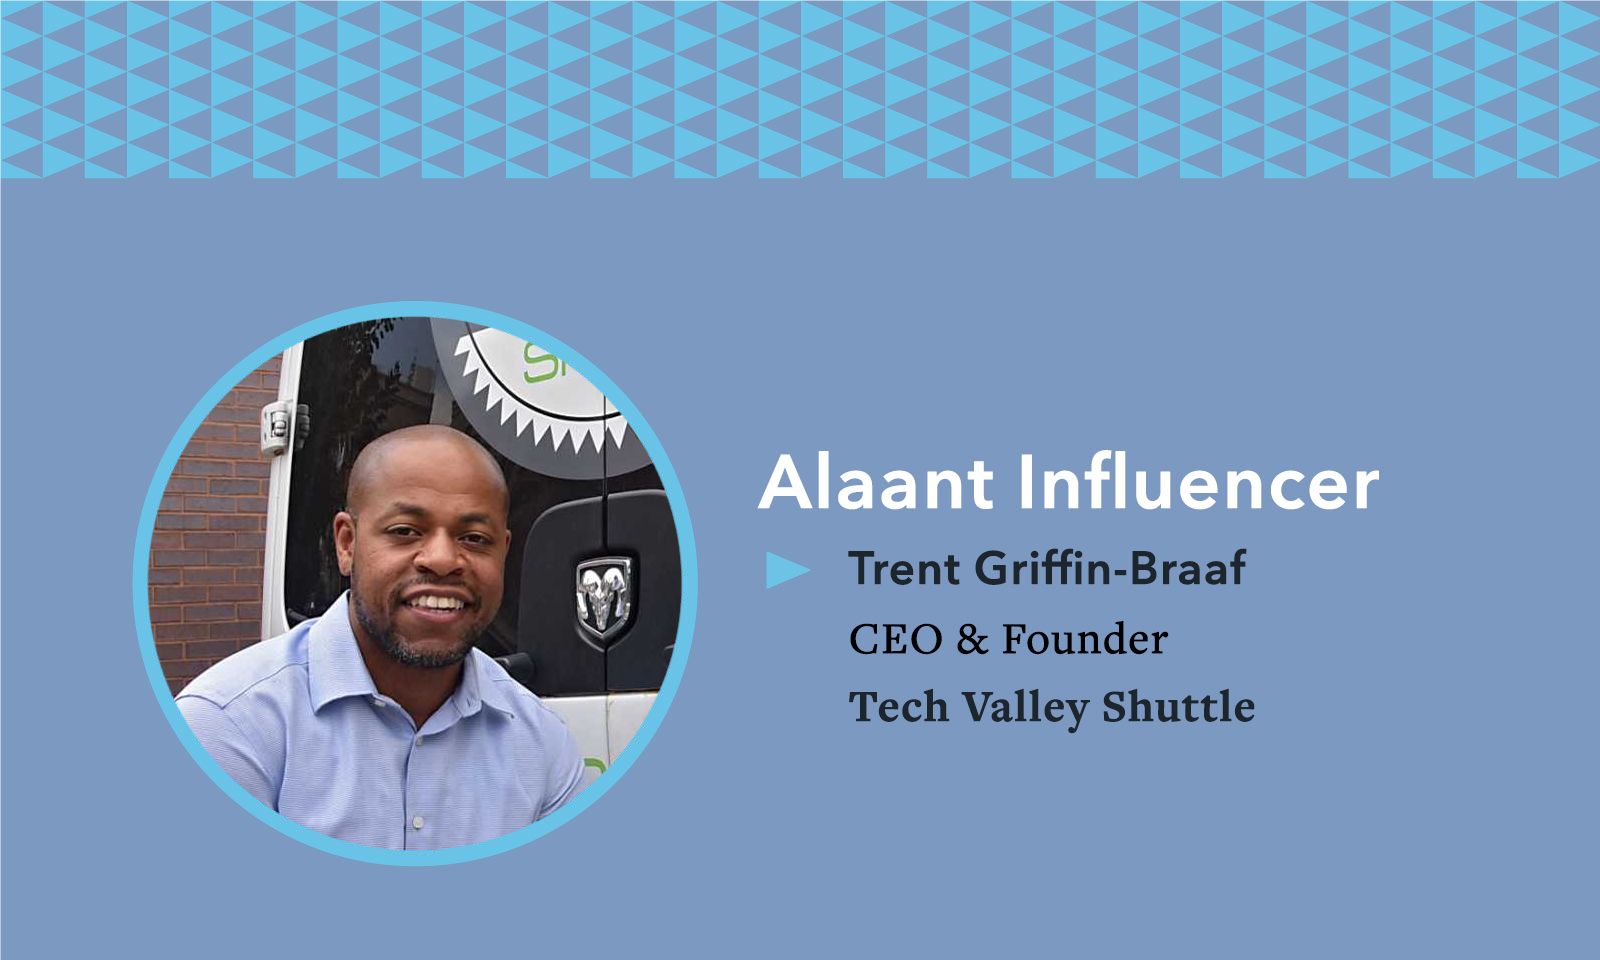 Alaant Influencer Trent Griffin-Braaf CEO & Founder Tech Valley Shuttle 